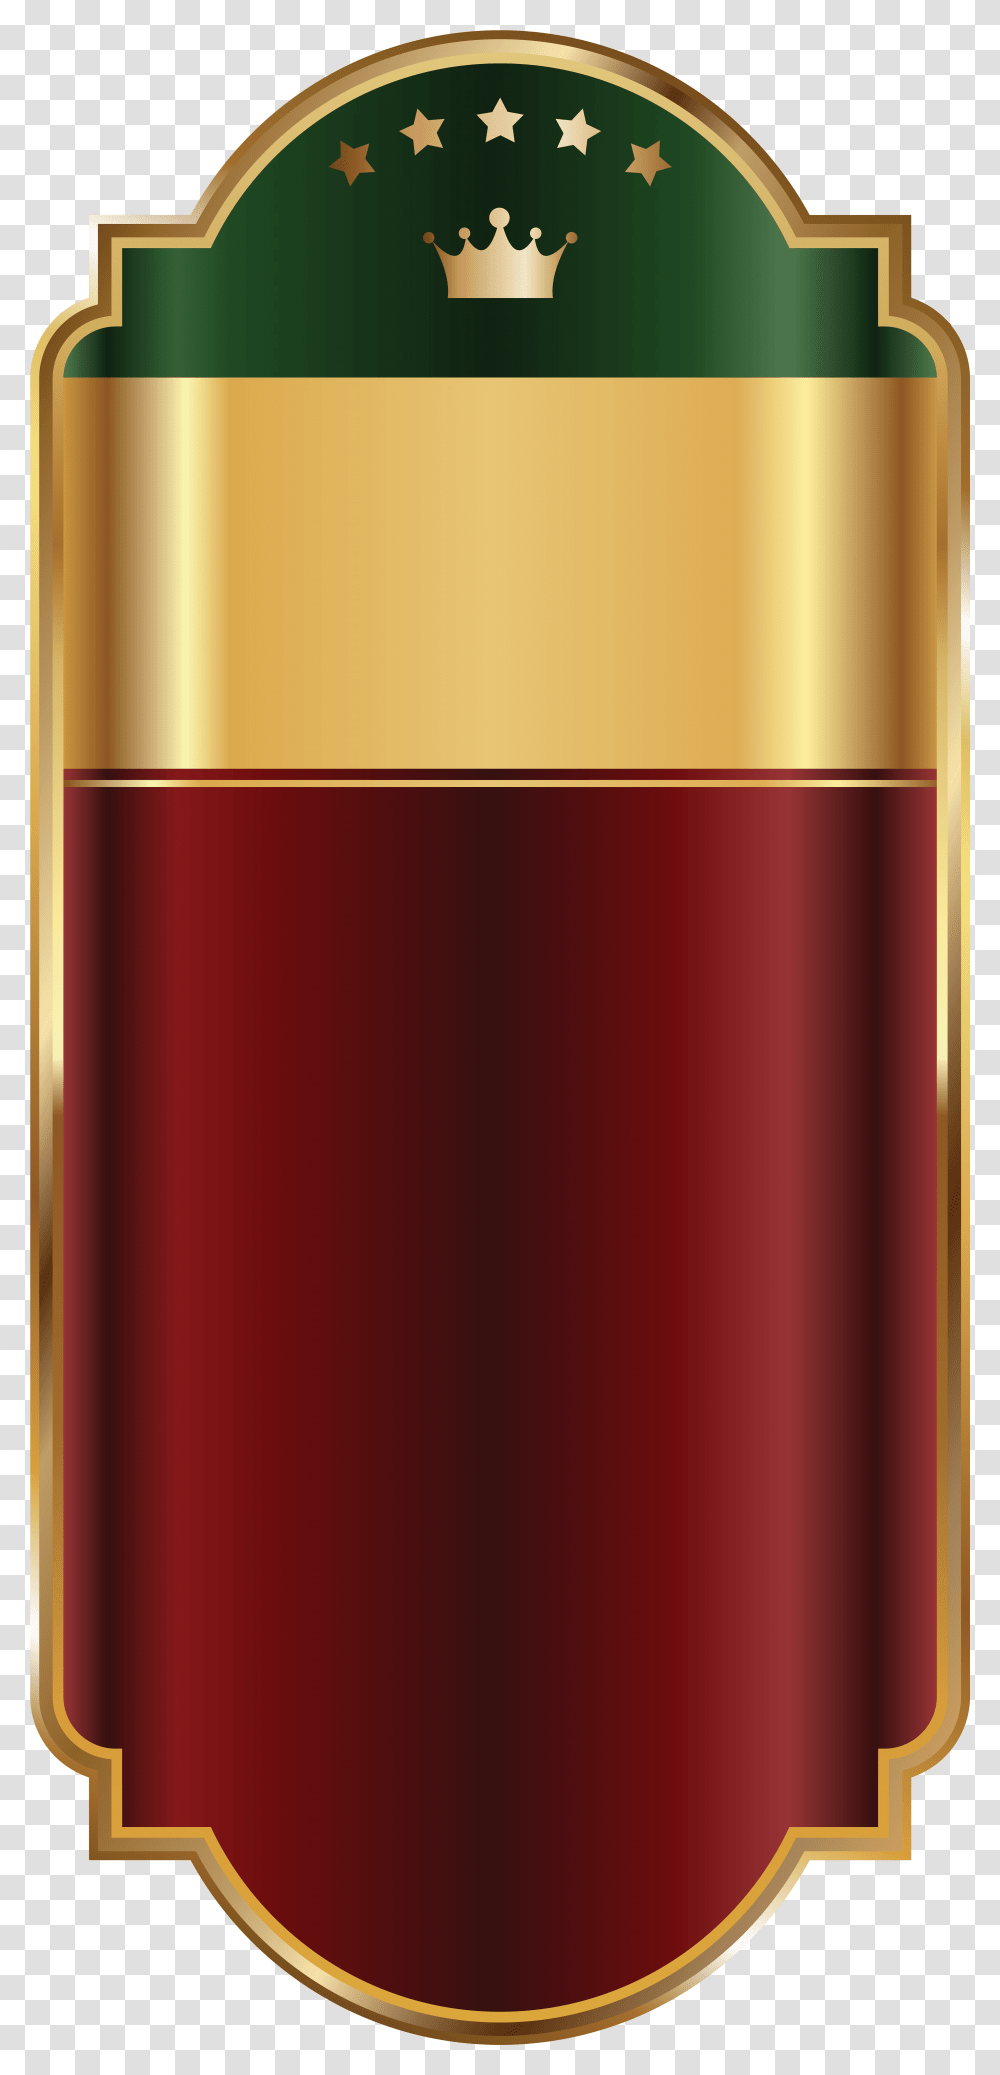 Red Label Template Clip Art Image Red Label Templates, Bottle, Perfume, Cosmetics, Alcohol Transparent Png